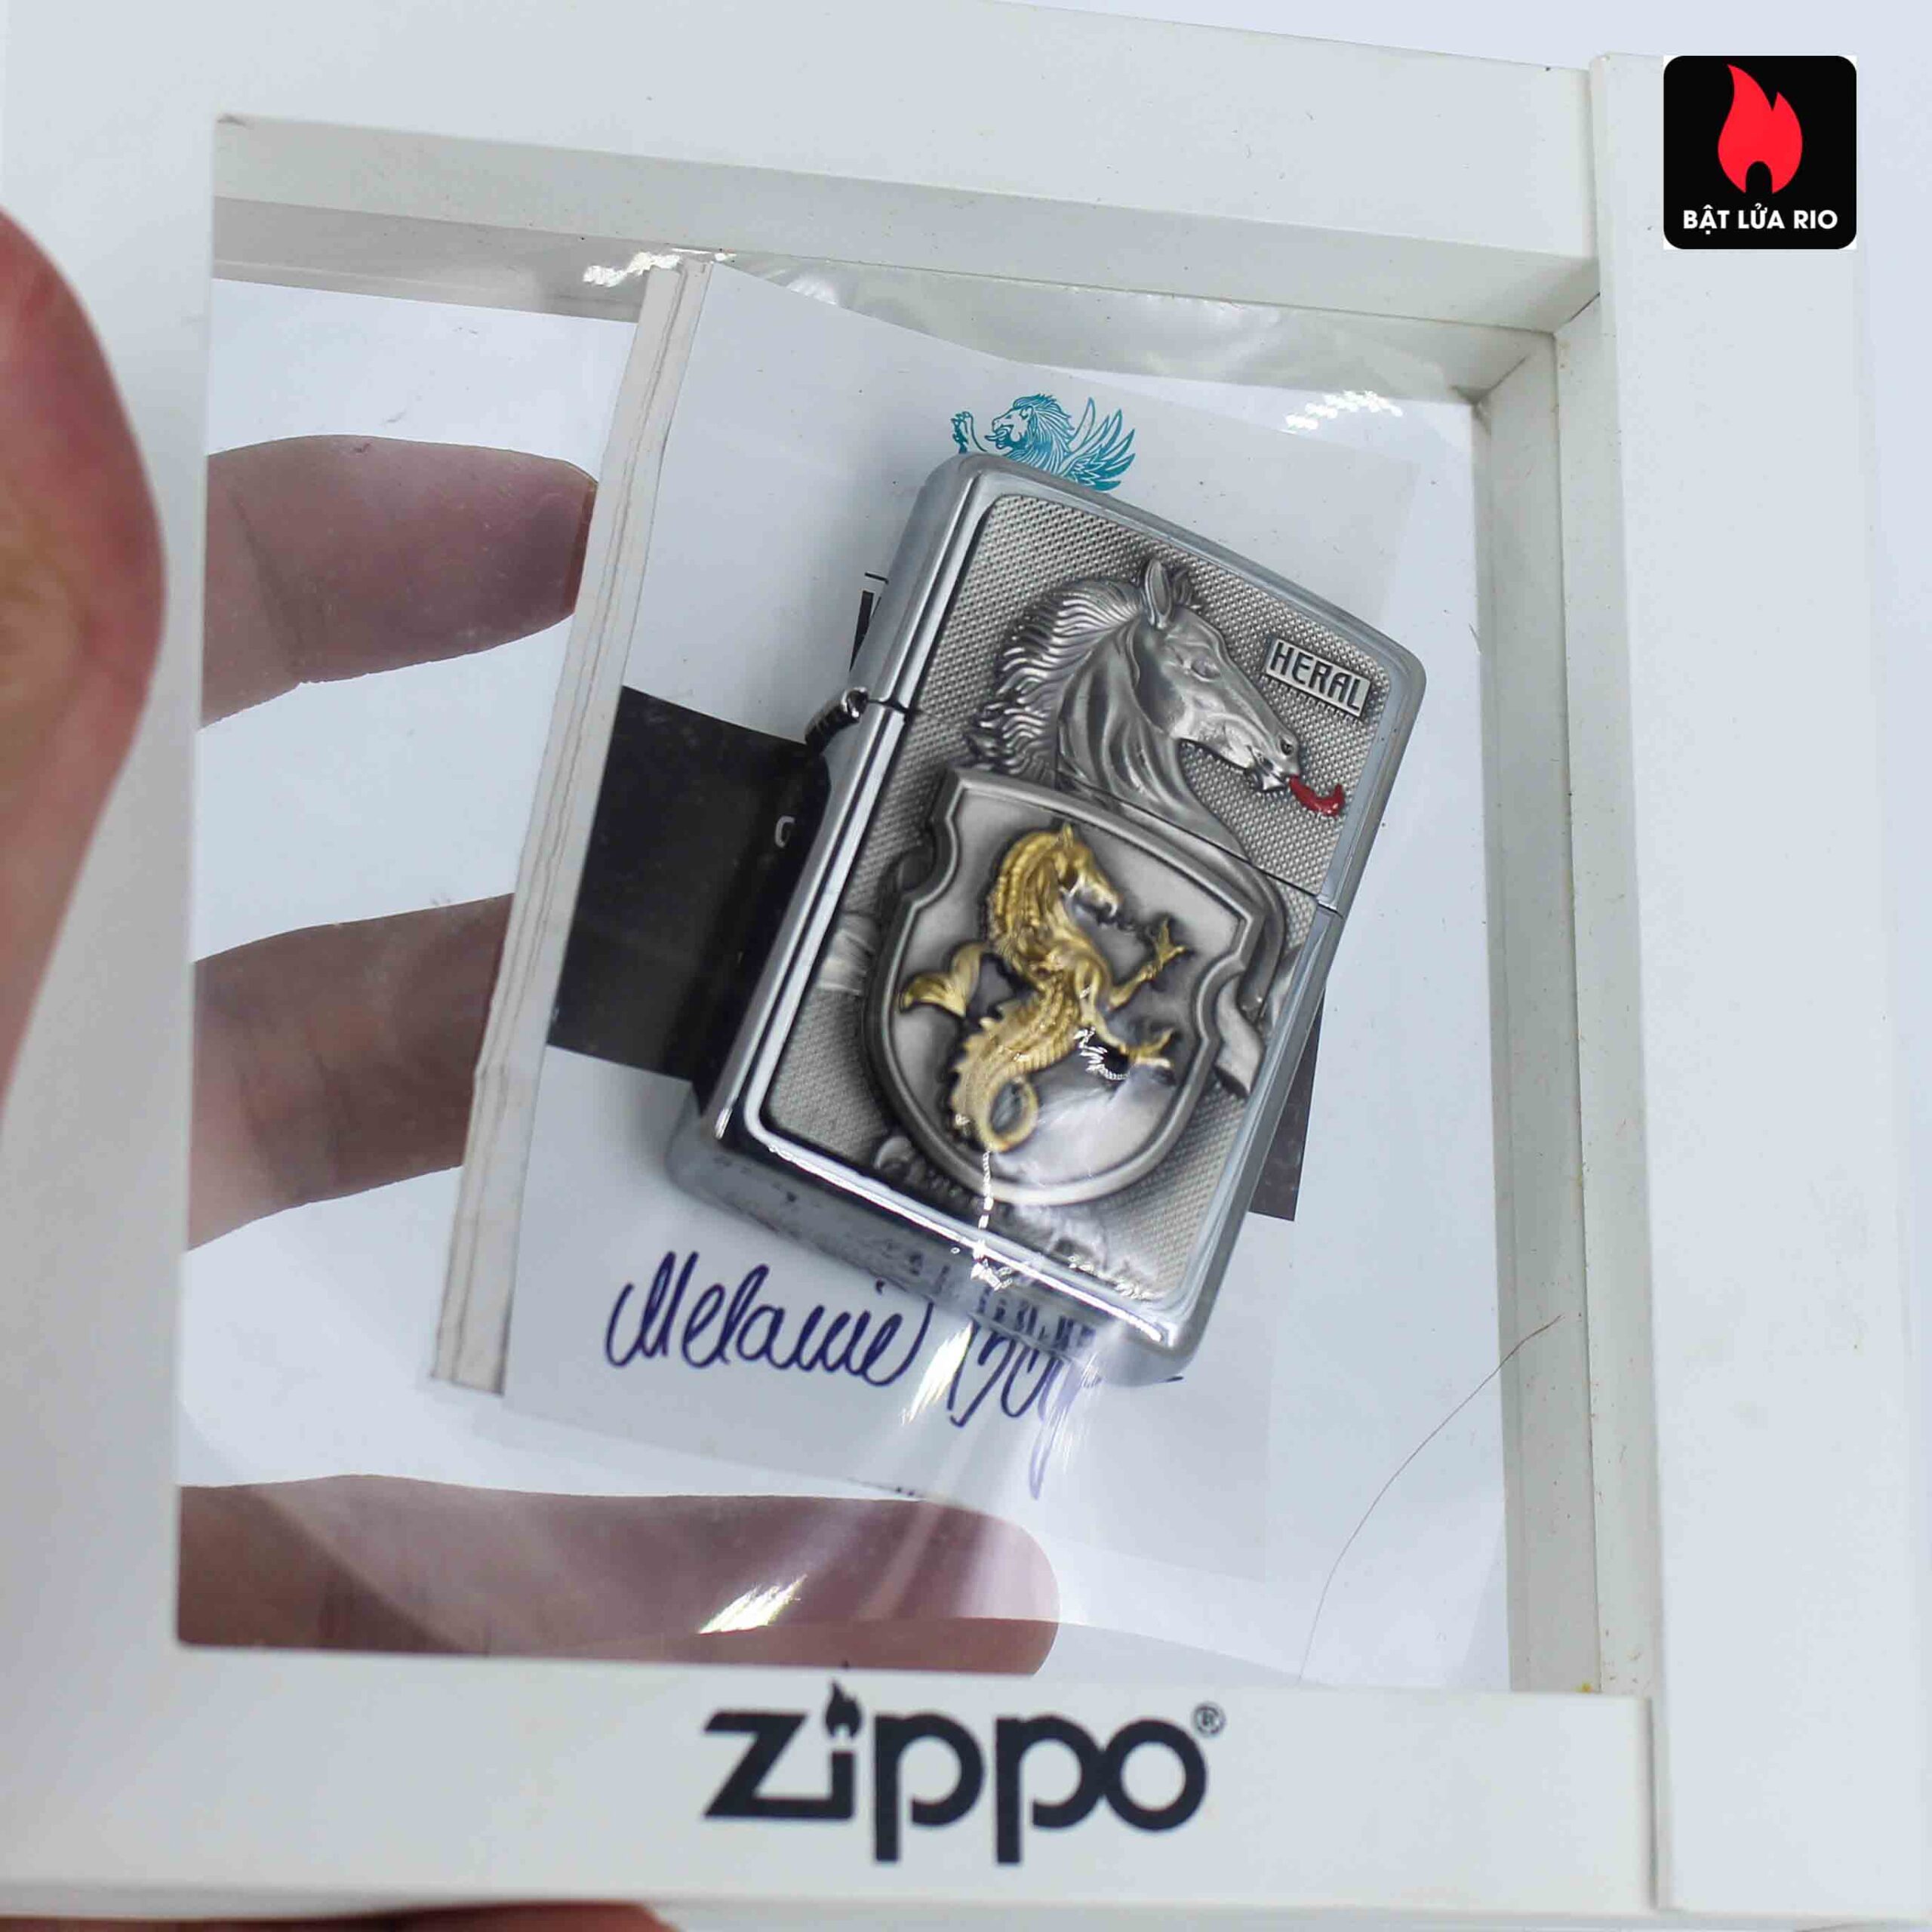 Zippo Set 2014 - Collectible Europe Animal Heral Arco Zippo Lighter Limited Edition 5